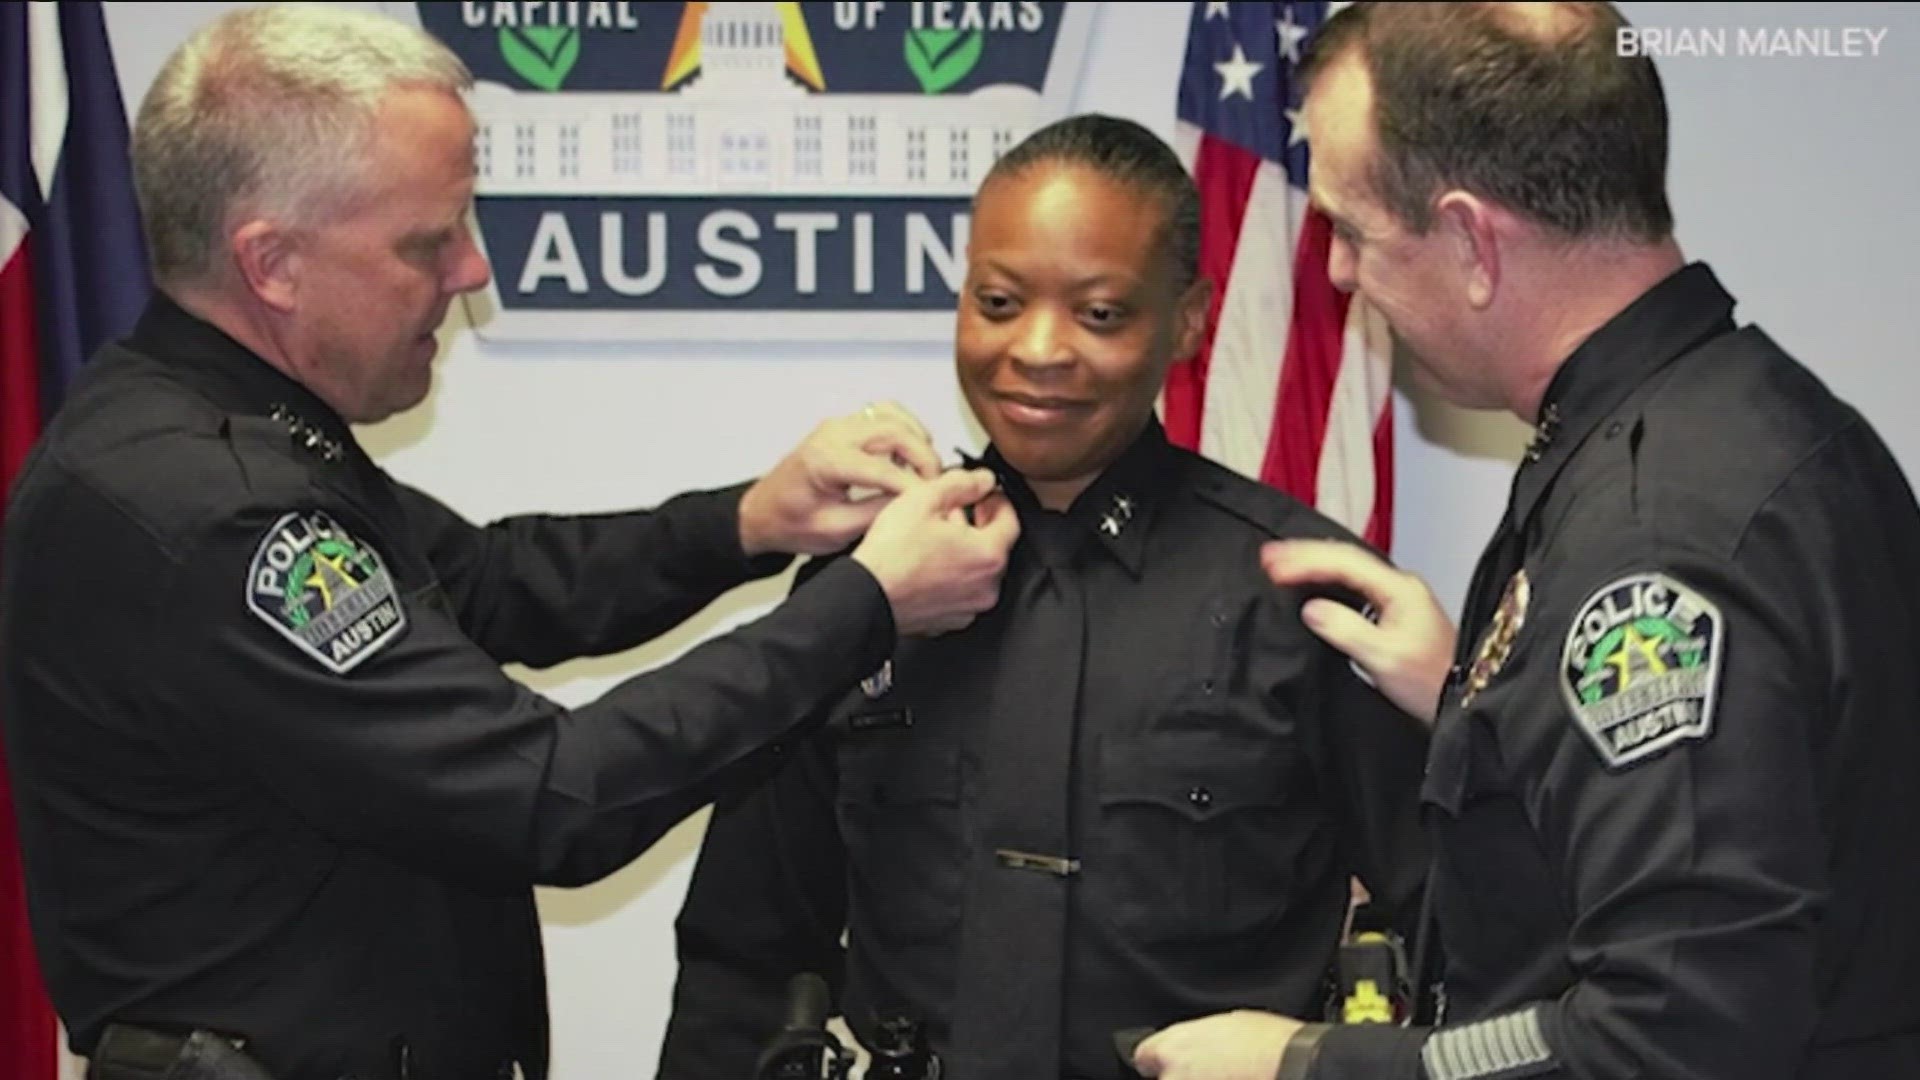 Austin Police Department Chief of Staff Robin Henderson will take over as interim chief of police. Henderson has been with APD for 26 years.